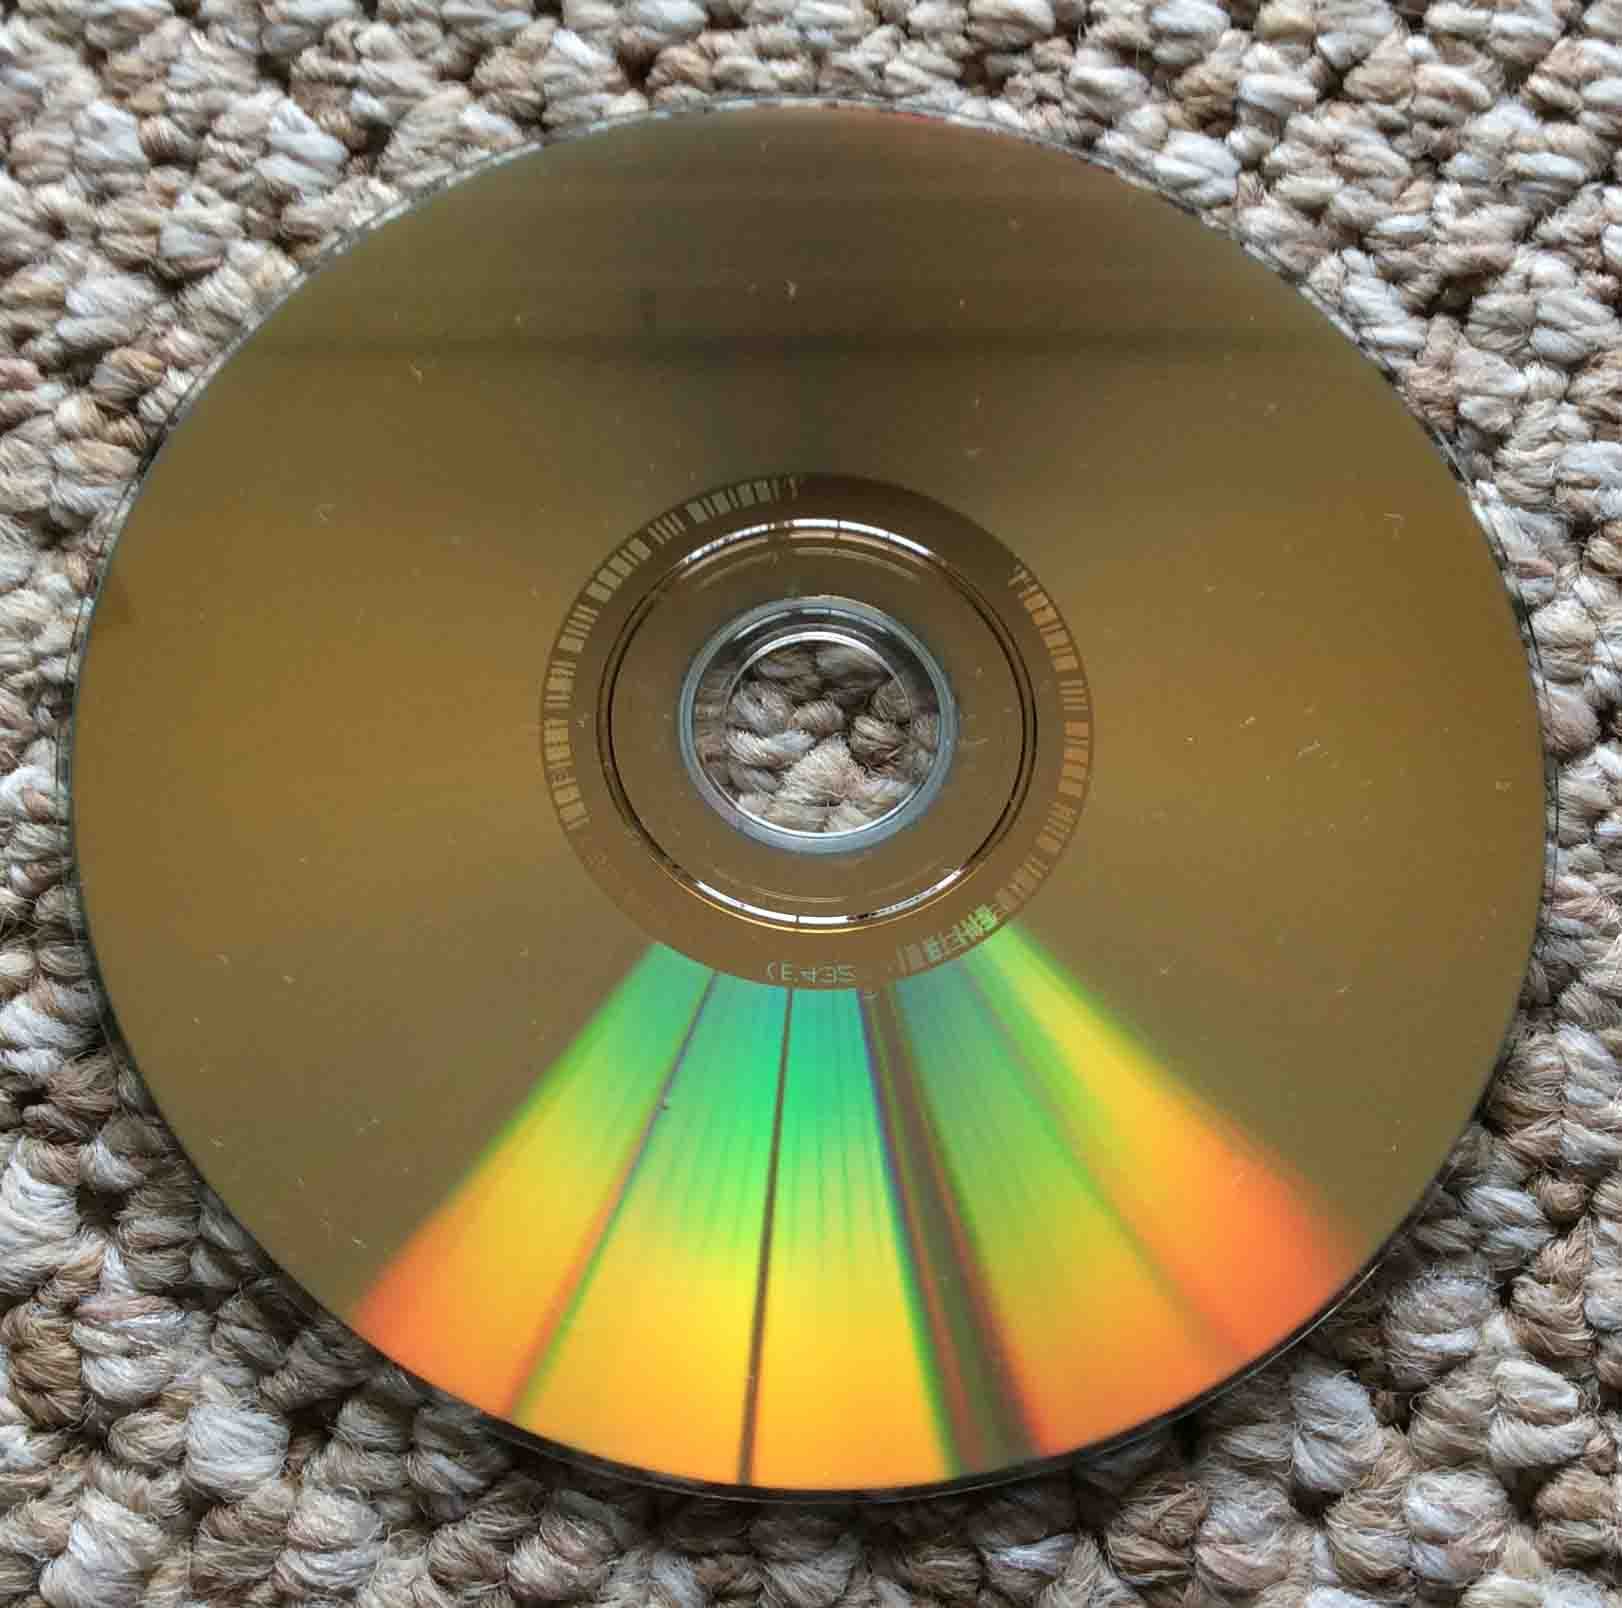 Check the disc for scratches or dirt: Clean the DVD with a soft cloth and check for any visible scratches that may be causing the skipping or freezing.
Try playing the DVD in a different player: If the DVD skips or freezes in one player but not in another, it may indicate a problem with the player itself.